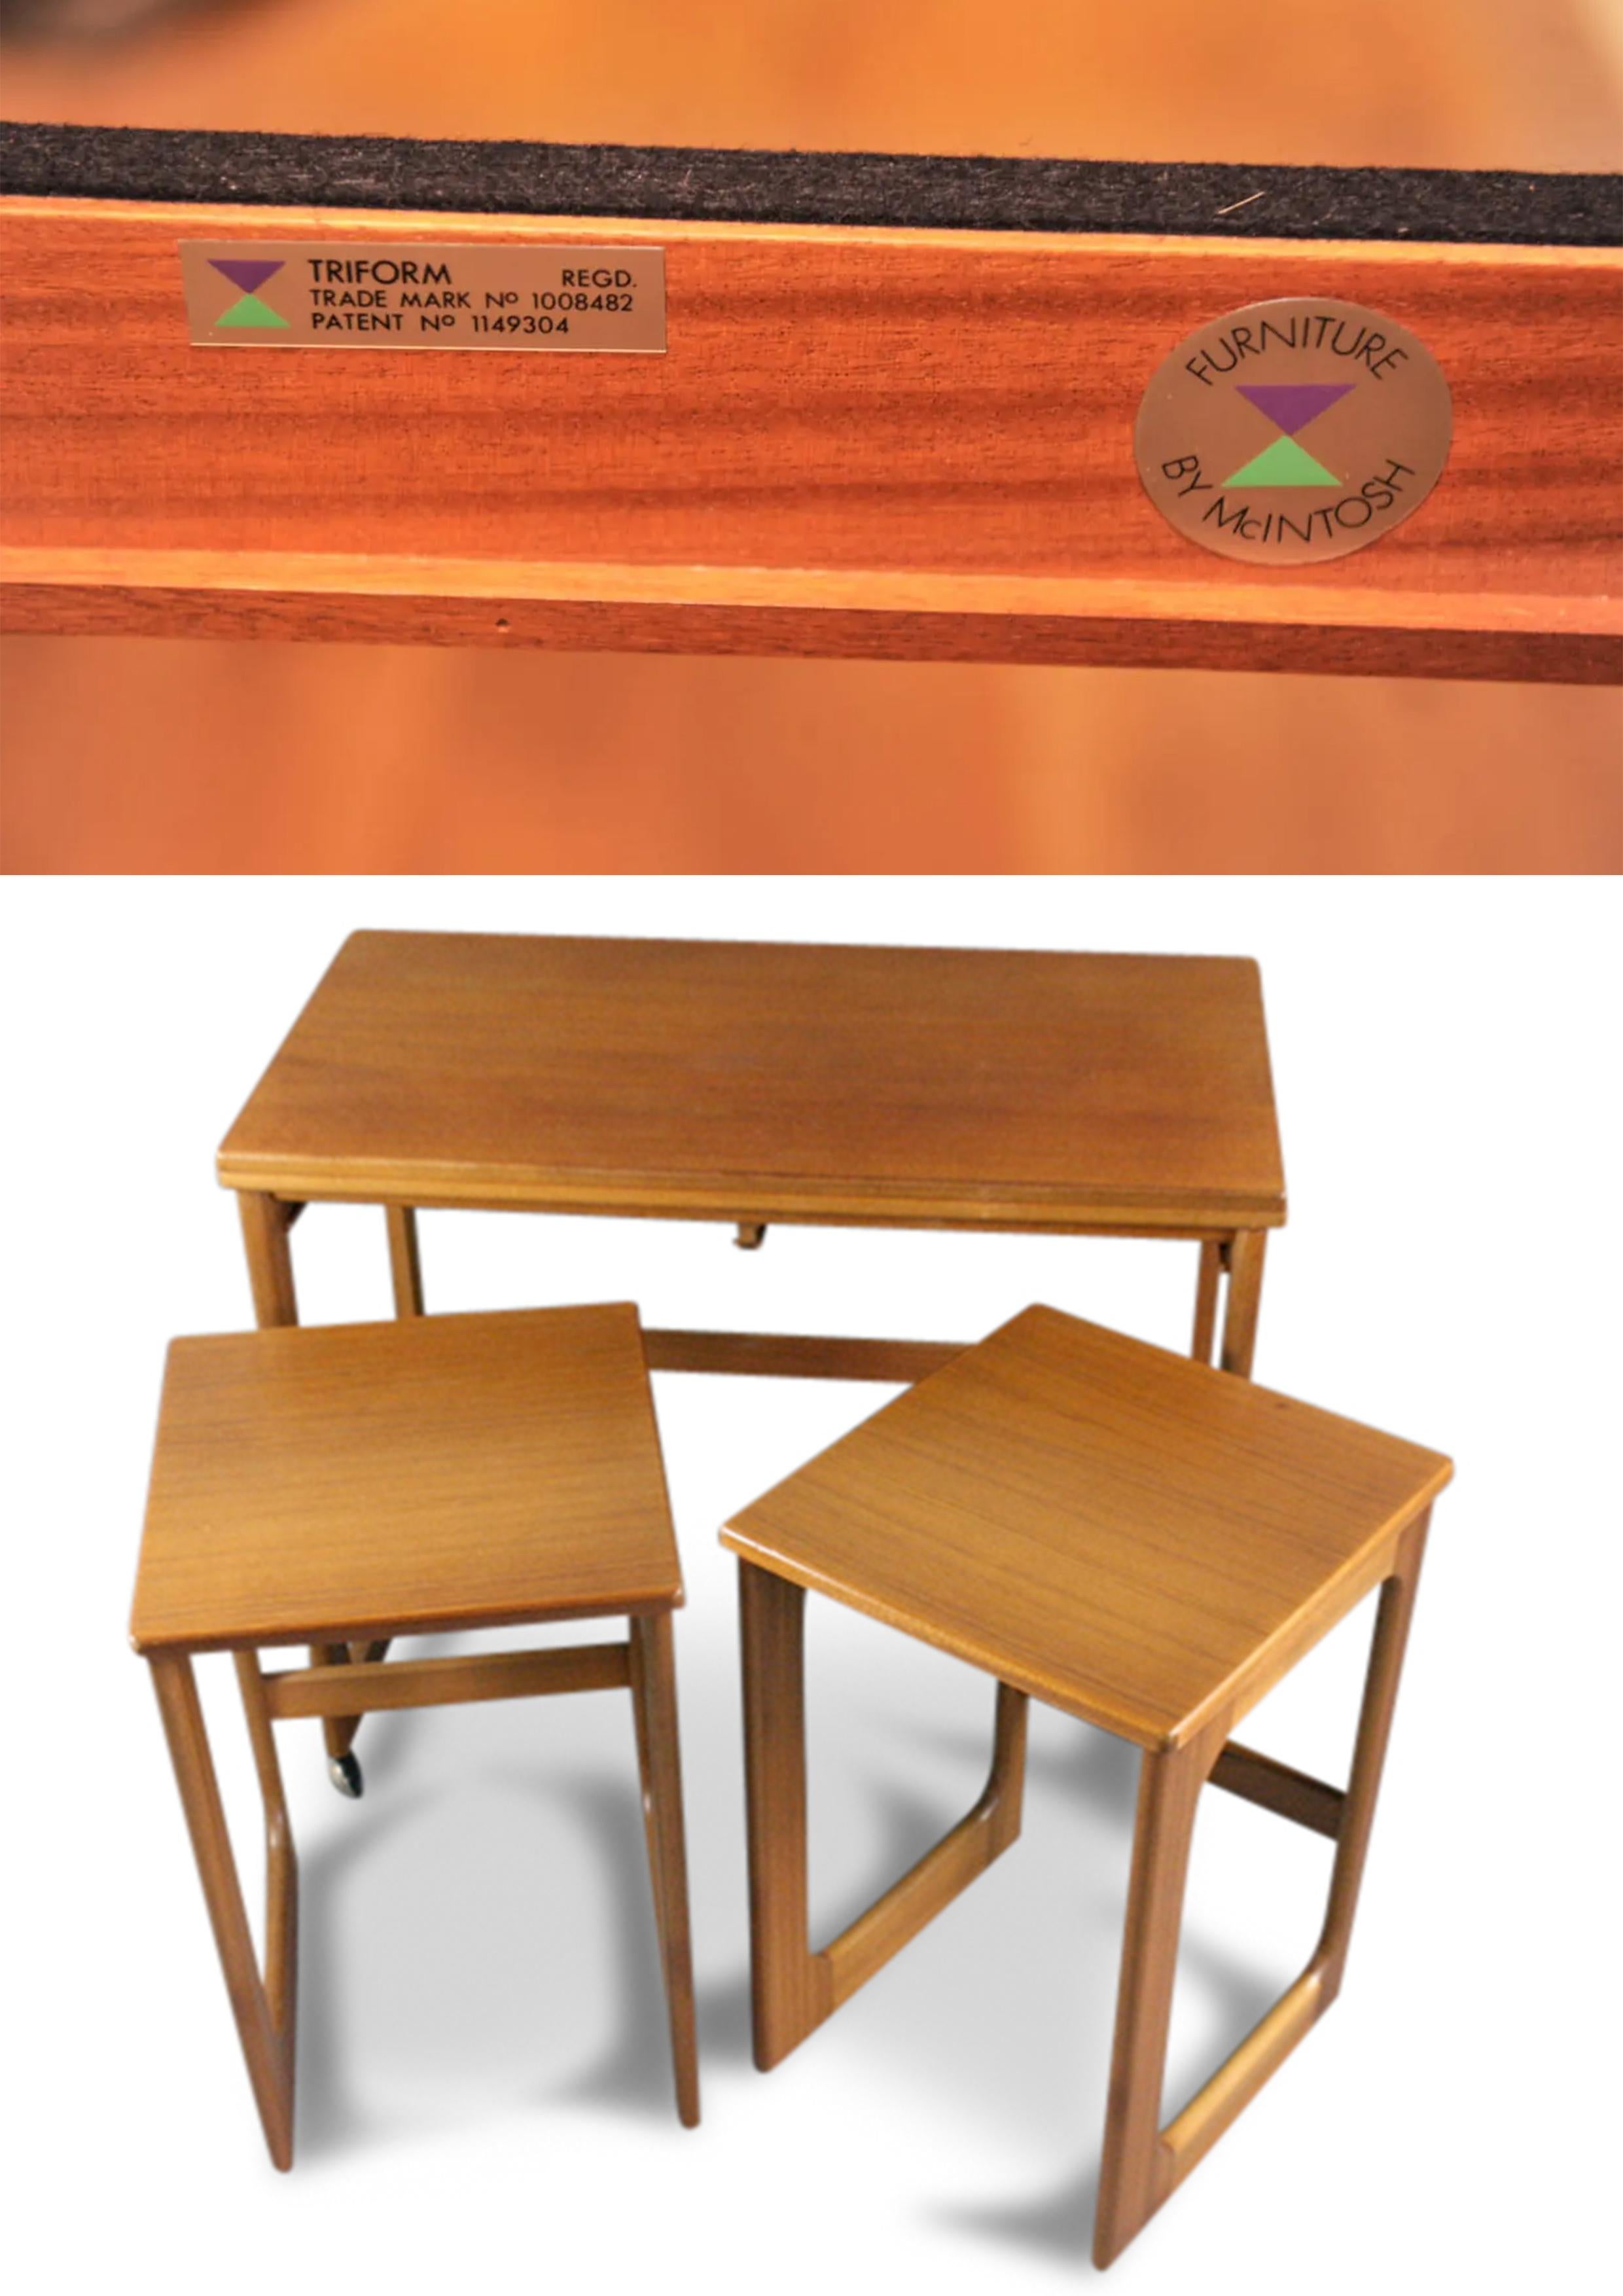 Mcintosh Tri-Form Metamorphic Twist & Turn Langthorne Nesting Tables Made in Kirkaldy Scotland 1960's

Wonderful stylish tables, that open up to create double the table top space when you are entertaining guests & slide away for a smart storage